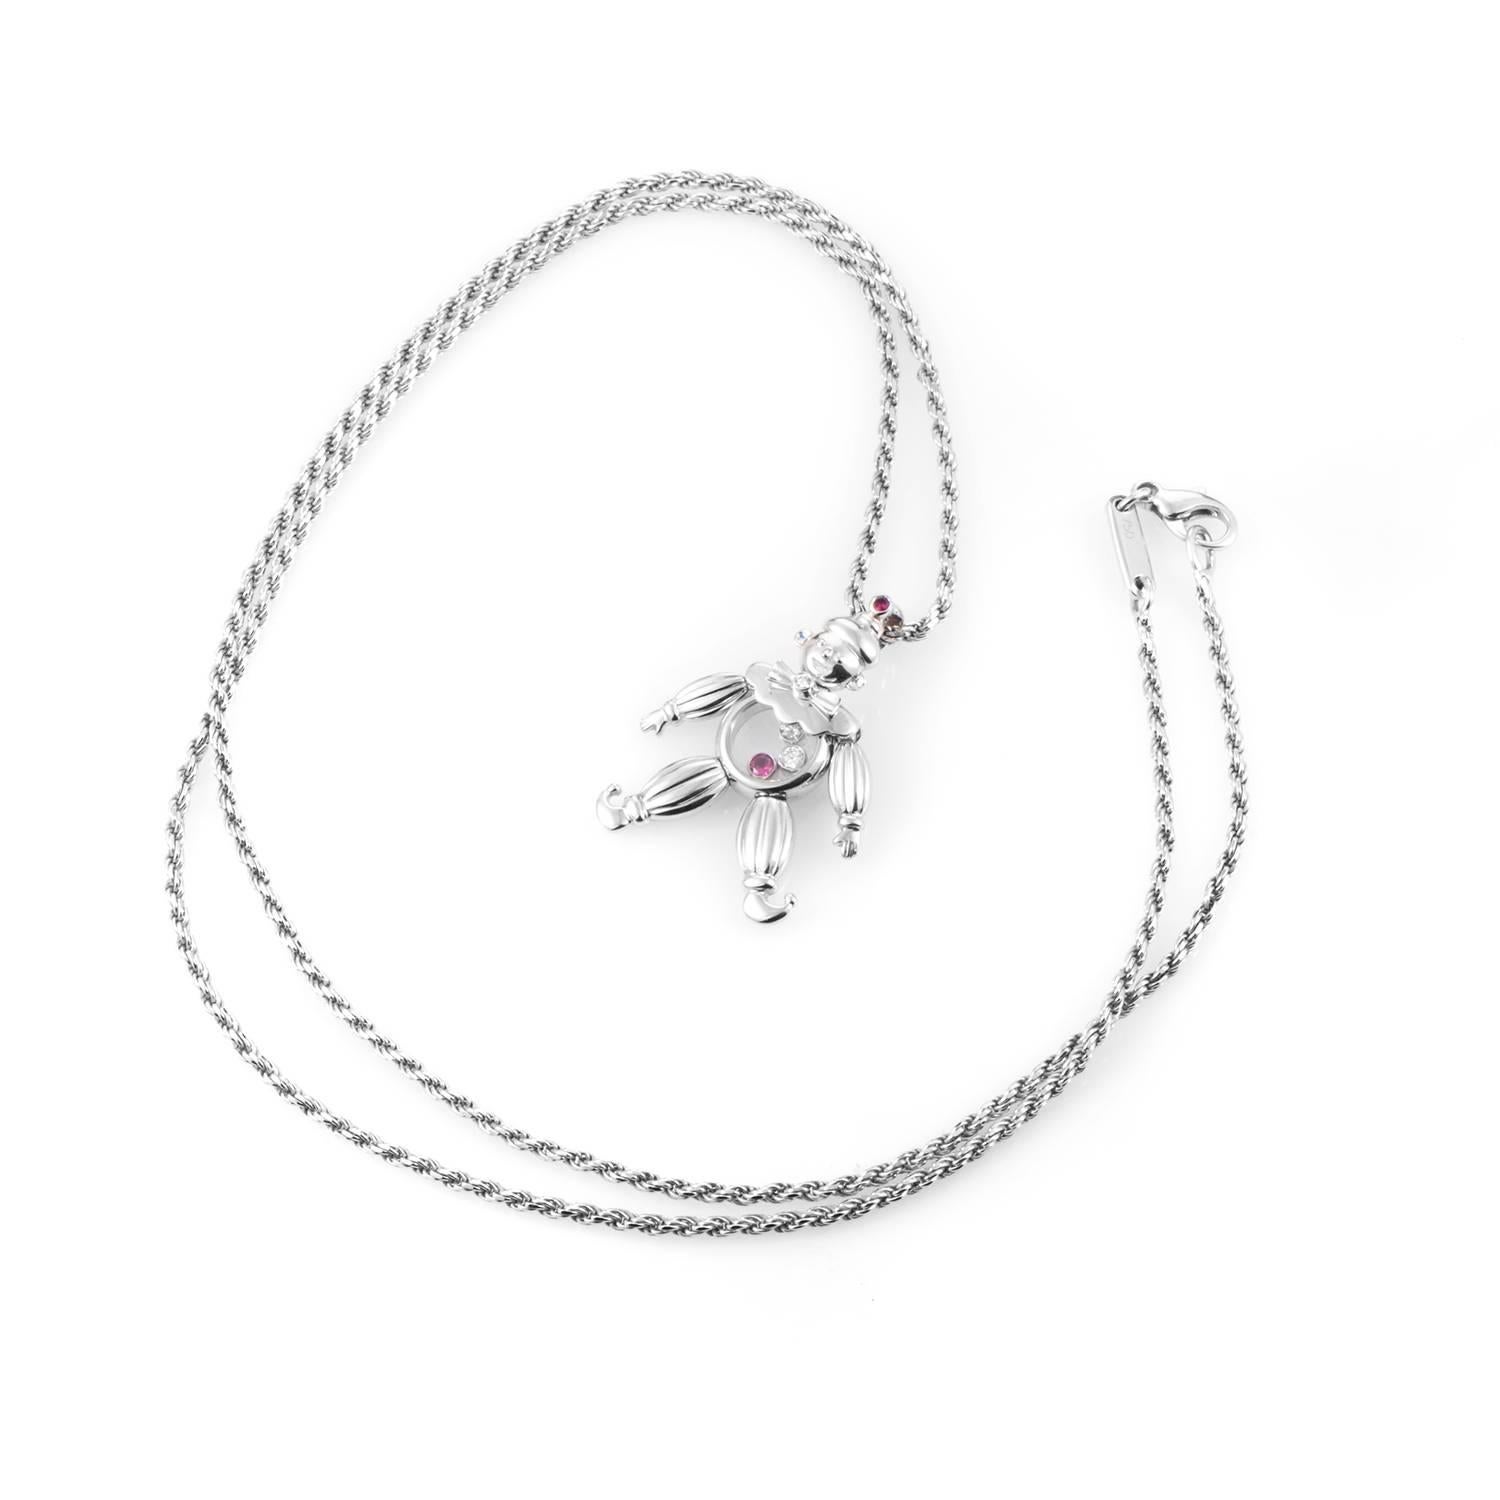 A nostalgic piece by Chopard, this playful clown necklace is a whimsical yet sophisticated 18K white gold necklace and pendant. The palma chain is an intriguing base for this charming clown with bezel set diamonds and rubies that tinkle against each